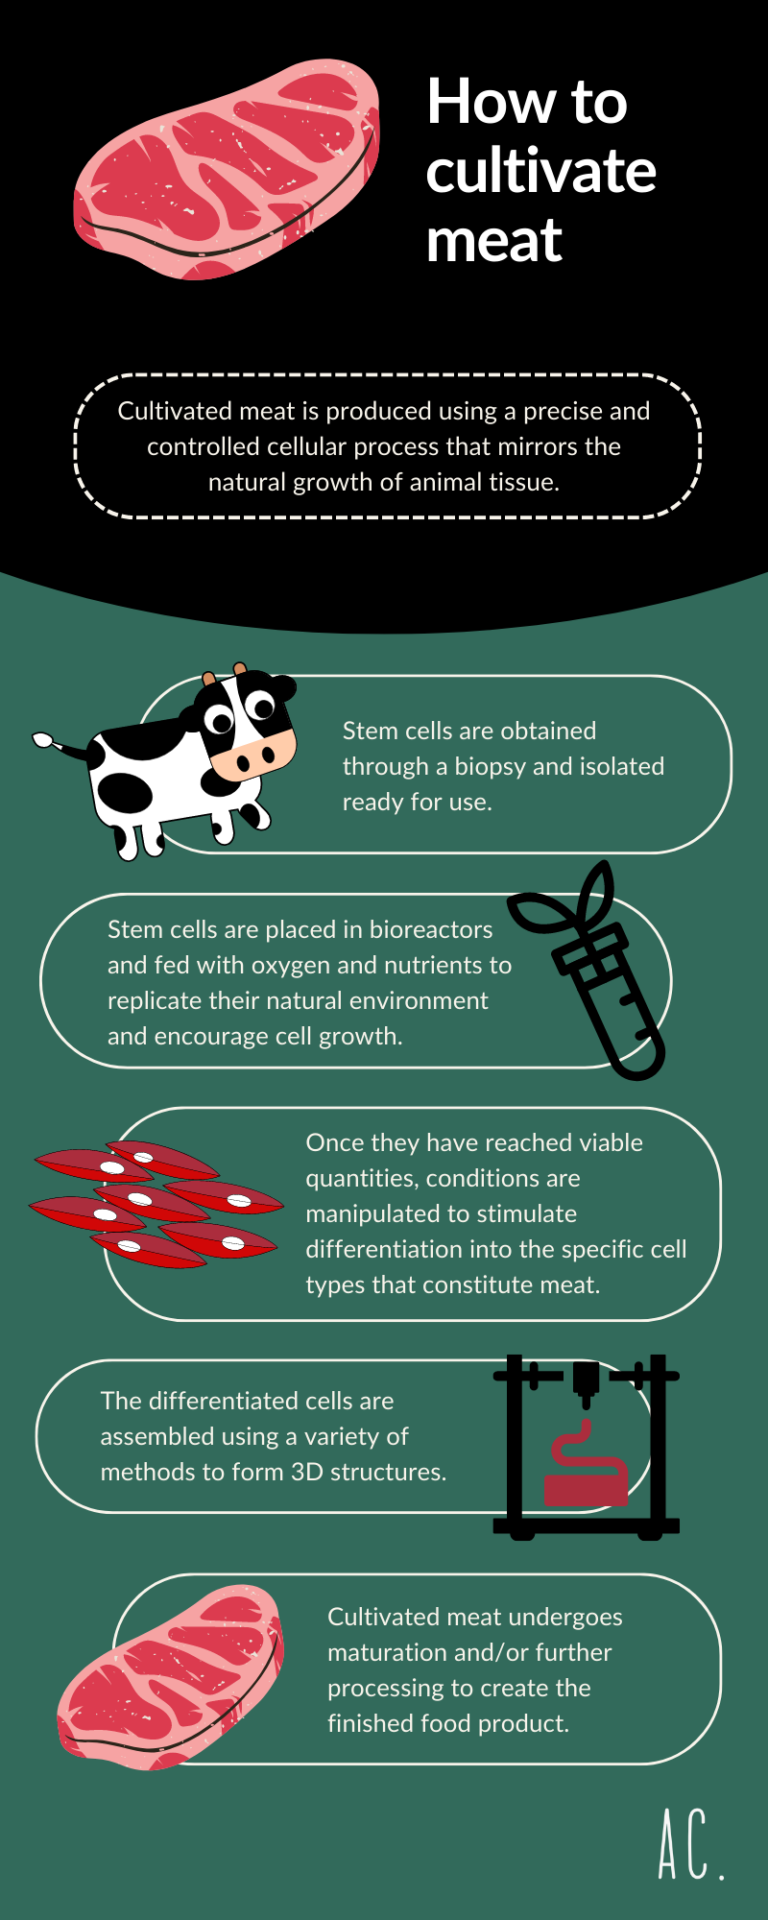 An infographic demonstrating the process of how to cultivate meat. There are 5 steps, each illustrated with drawings to portray the biopsy and isolation of stem cells, proliferation stage, differentiation stage, assembly using techniques such as bioprinting and maturation and manufacturing into final cultivated meat product